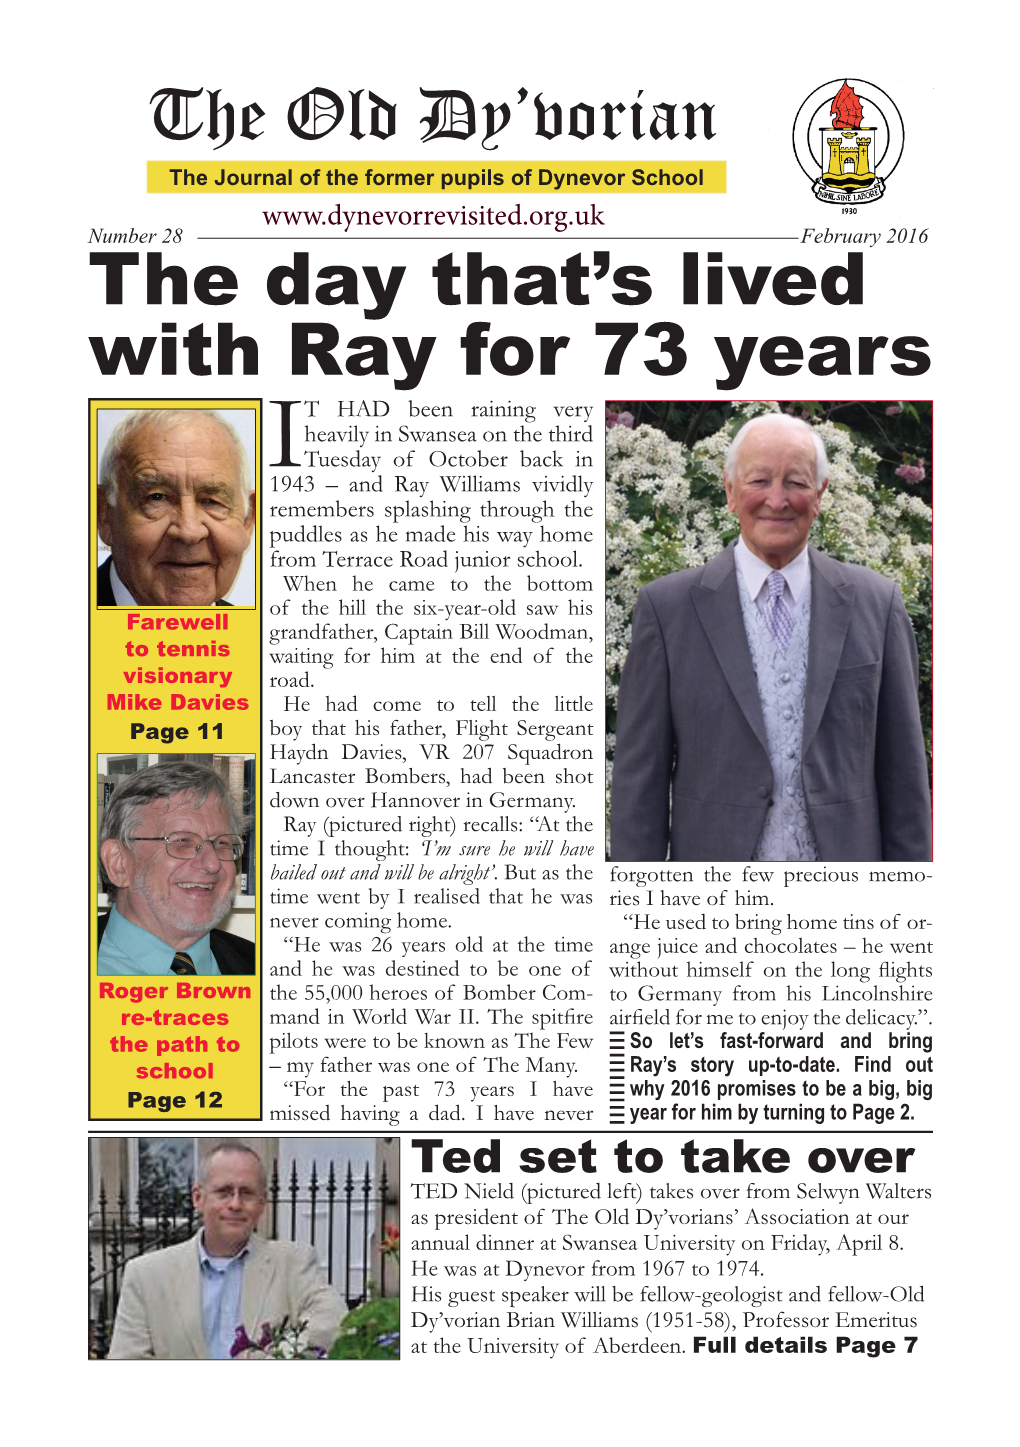 The Old Dy'vorian the Day That's Lived with Ray for 73 Years